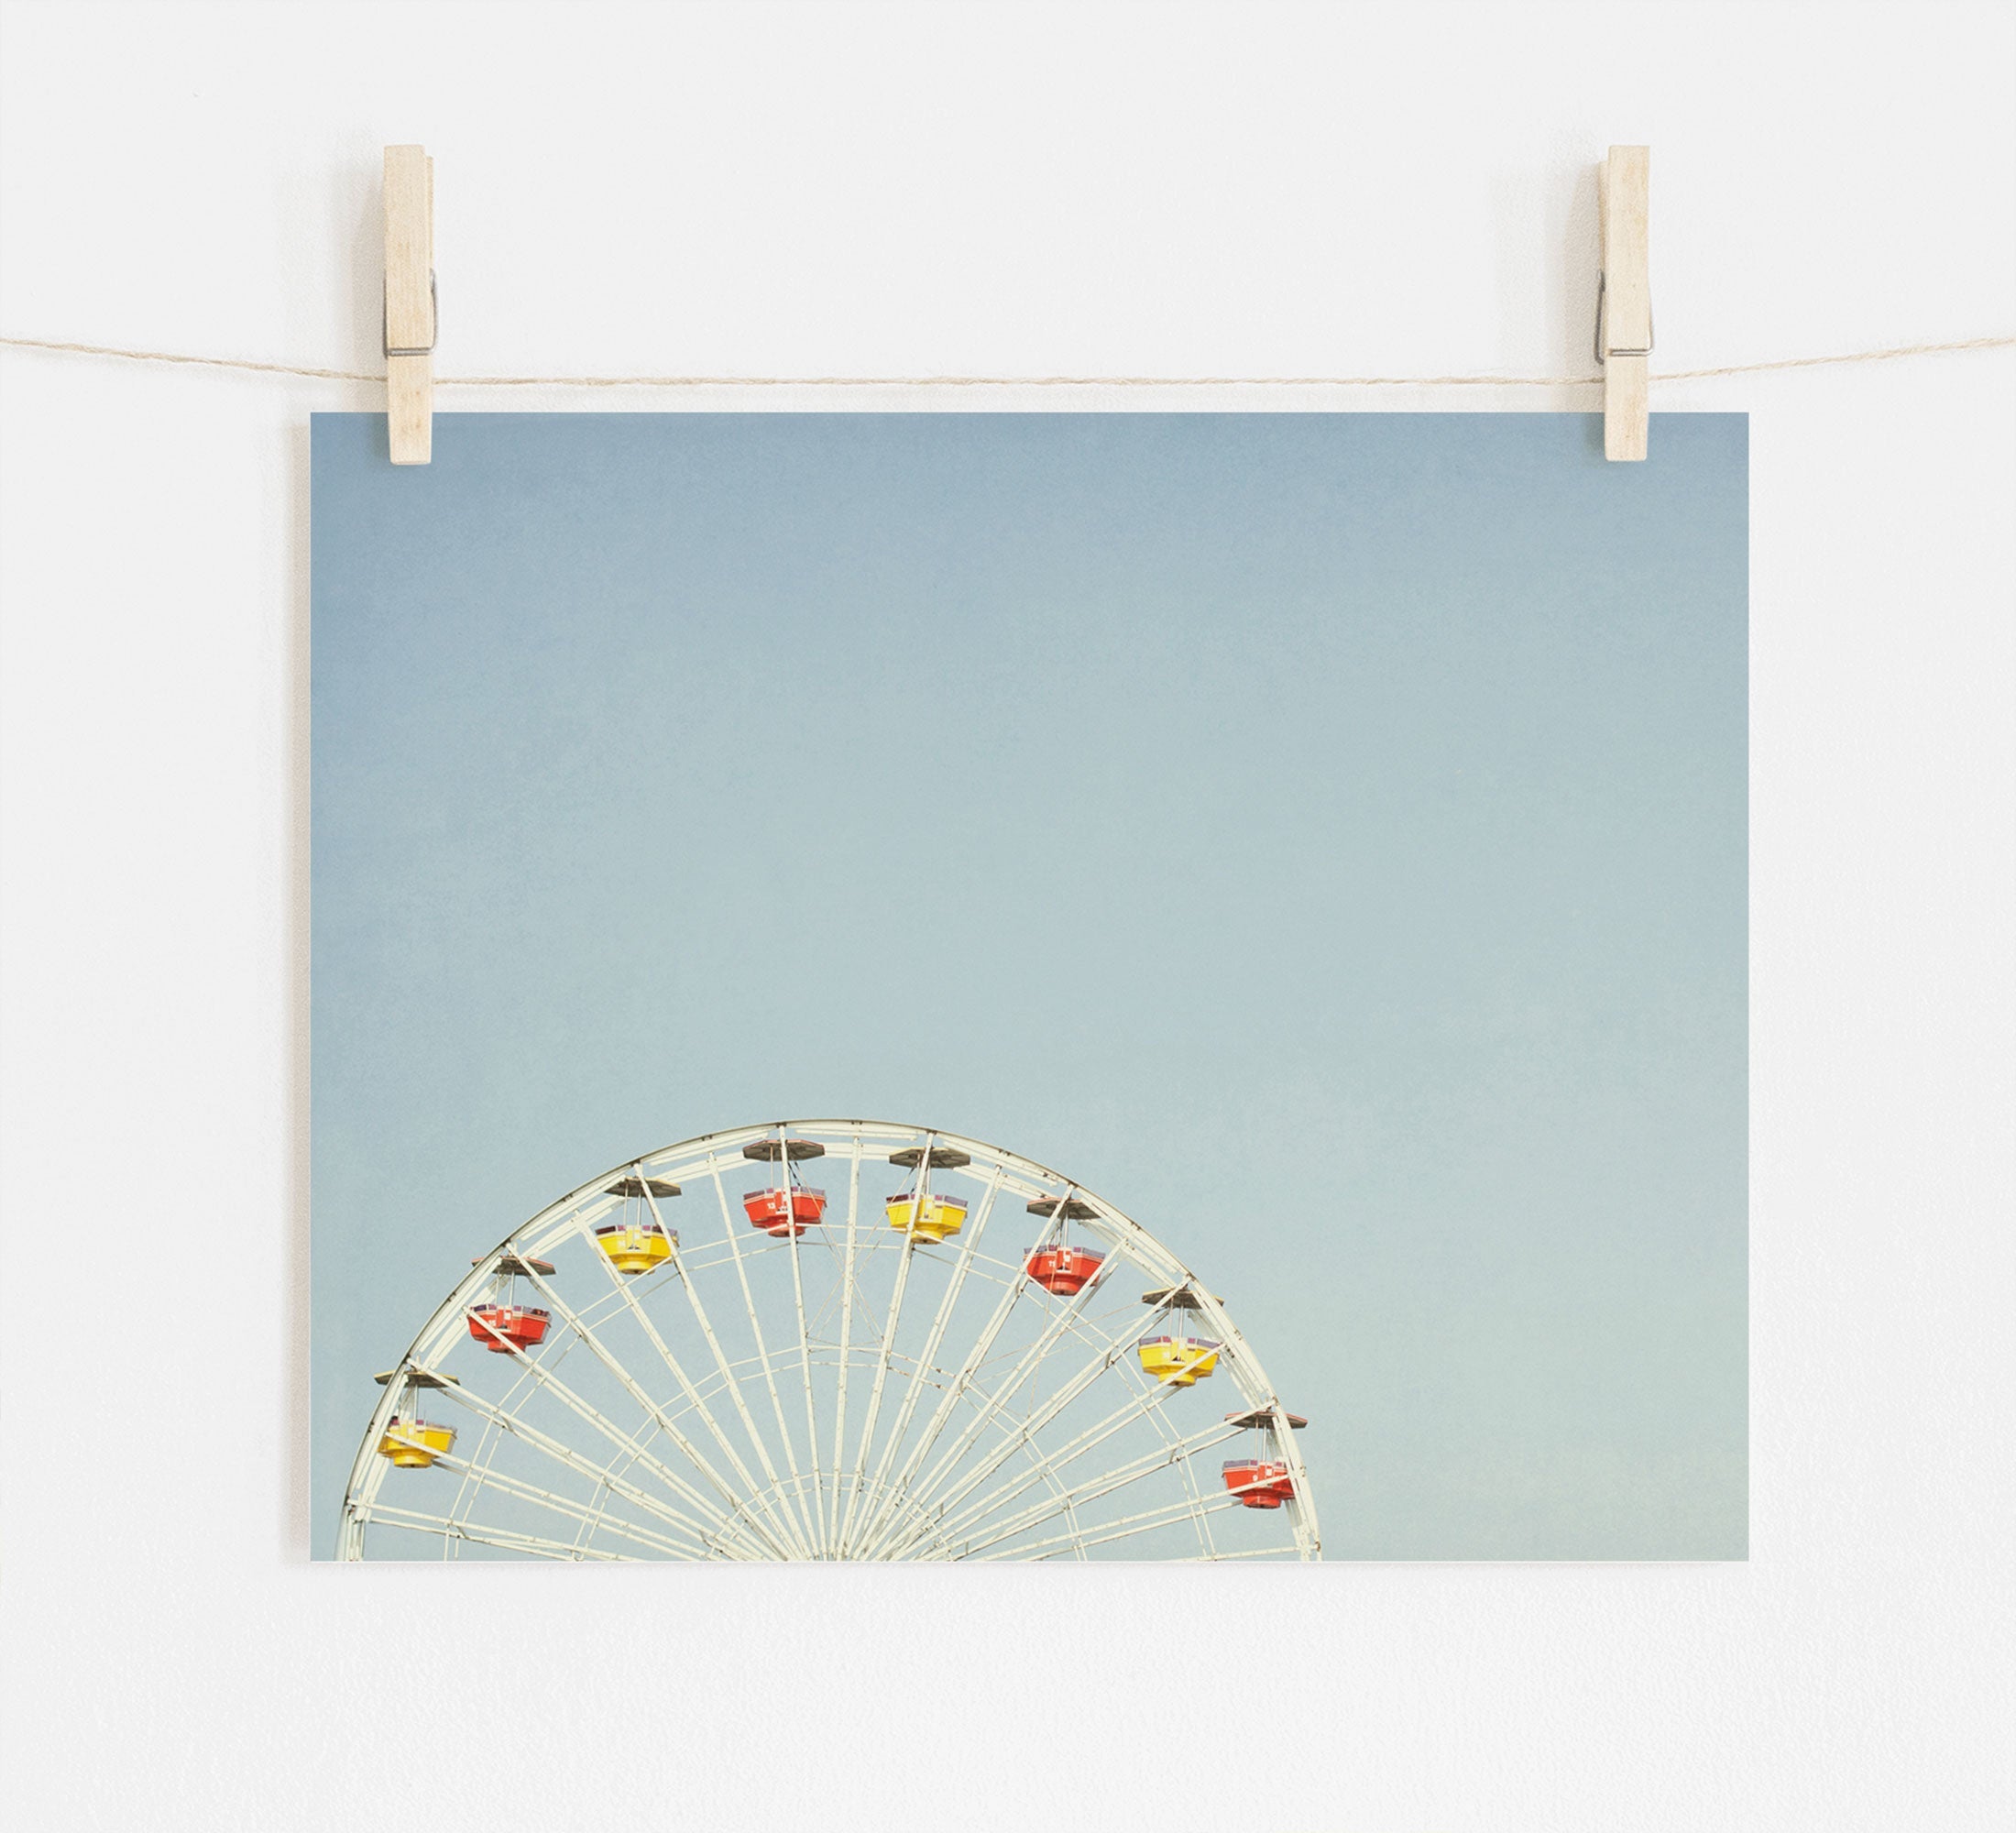 A photograph pinned by wooden clothespins on a string, depicting the top half of a ferris wheel with colorful cabins at Santa Monica Pier, set against a plain light blue background - Blue Minimalist Wall Decor, 'Ferris Blue' by Offley Green.